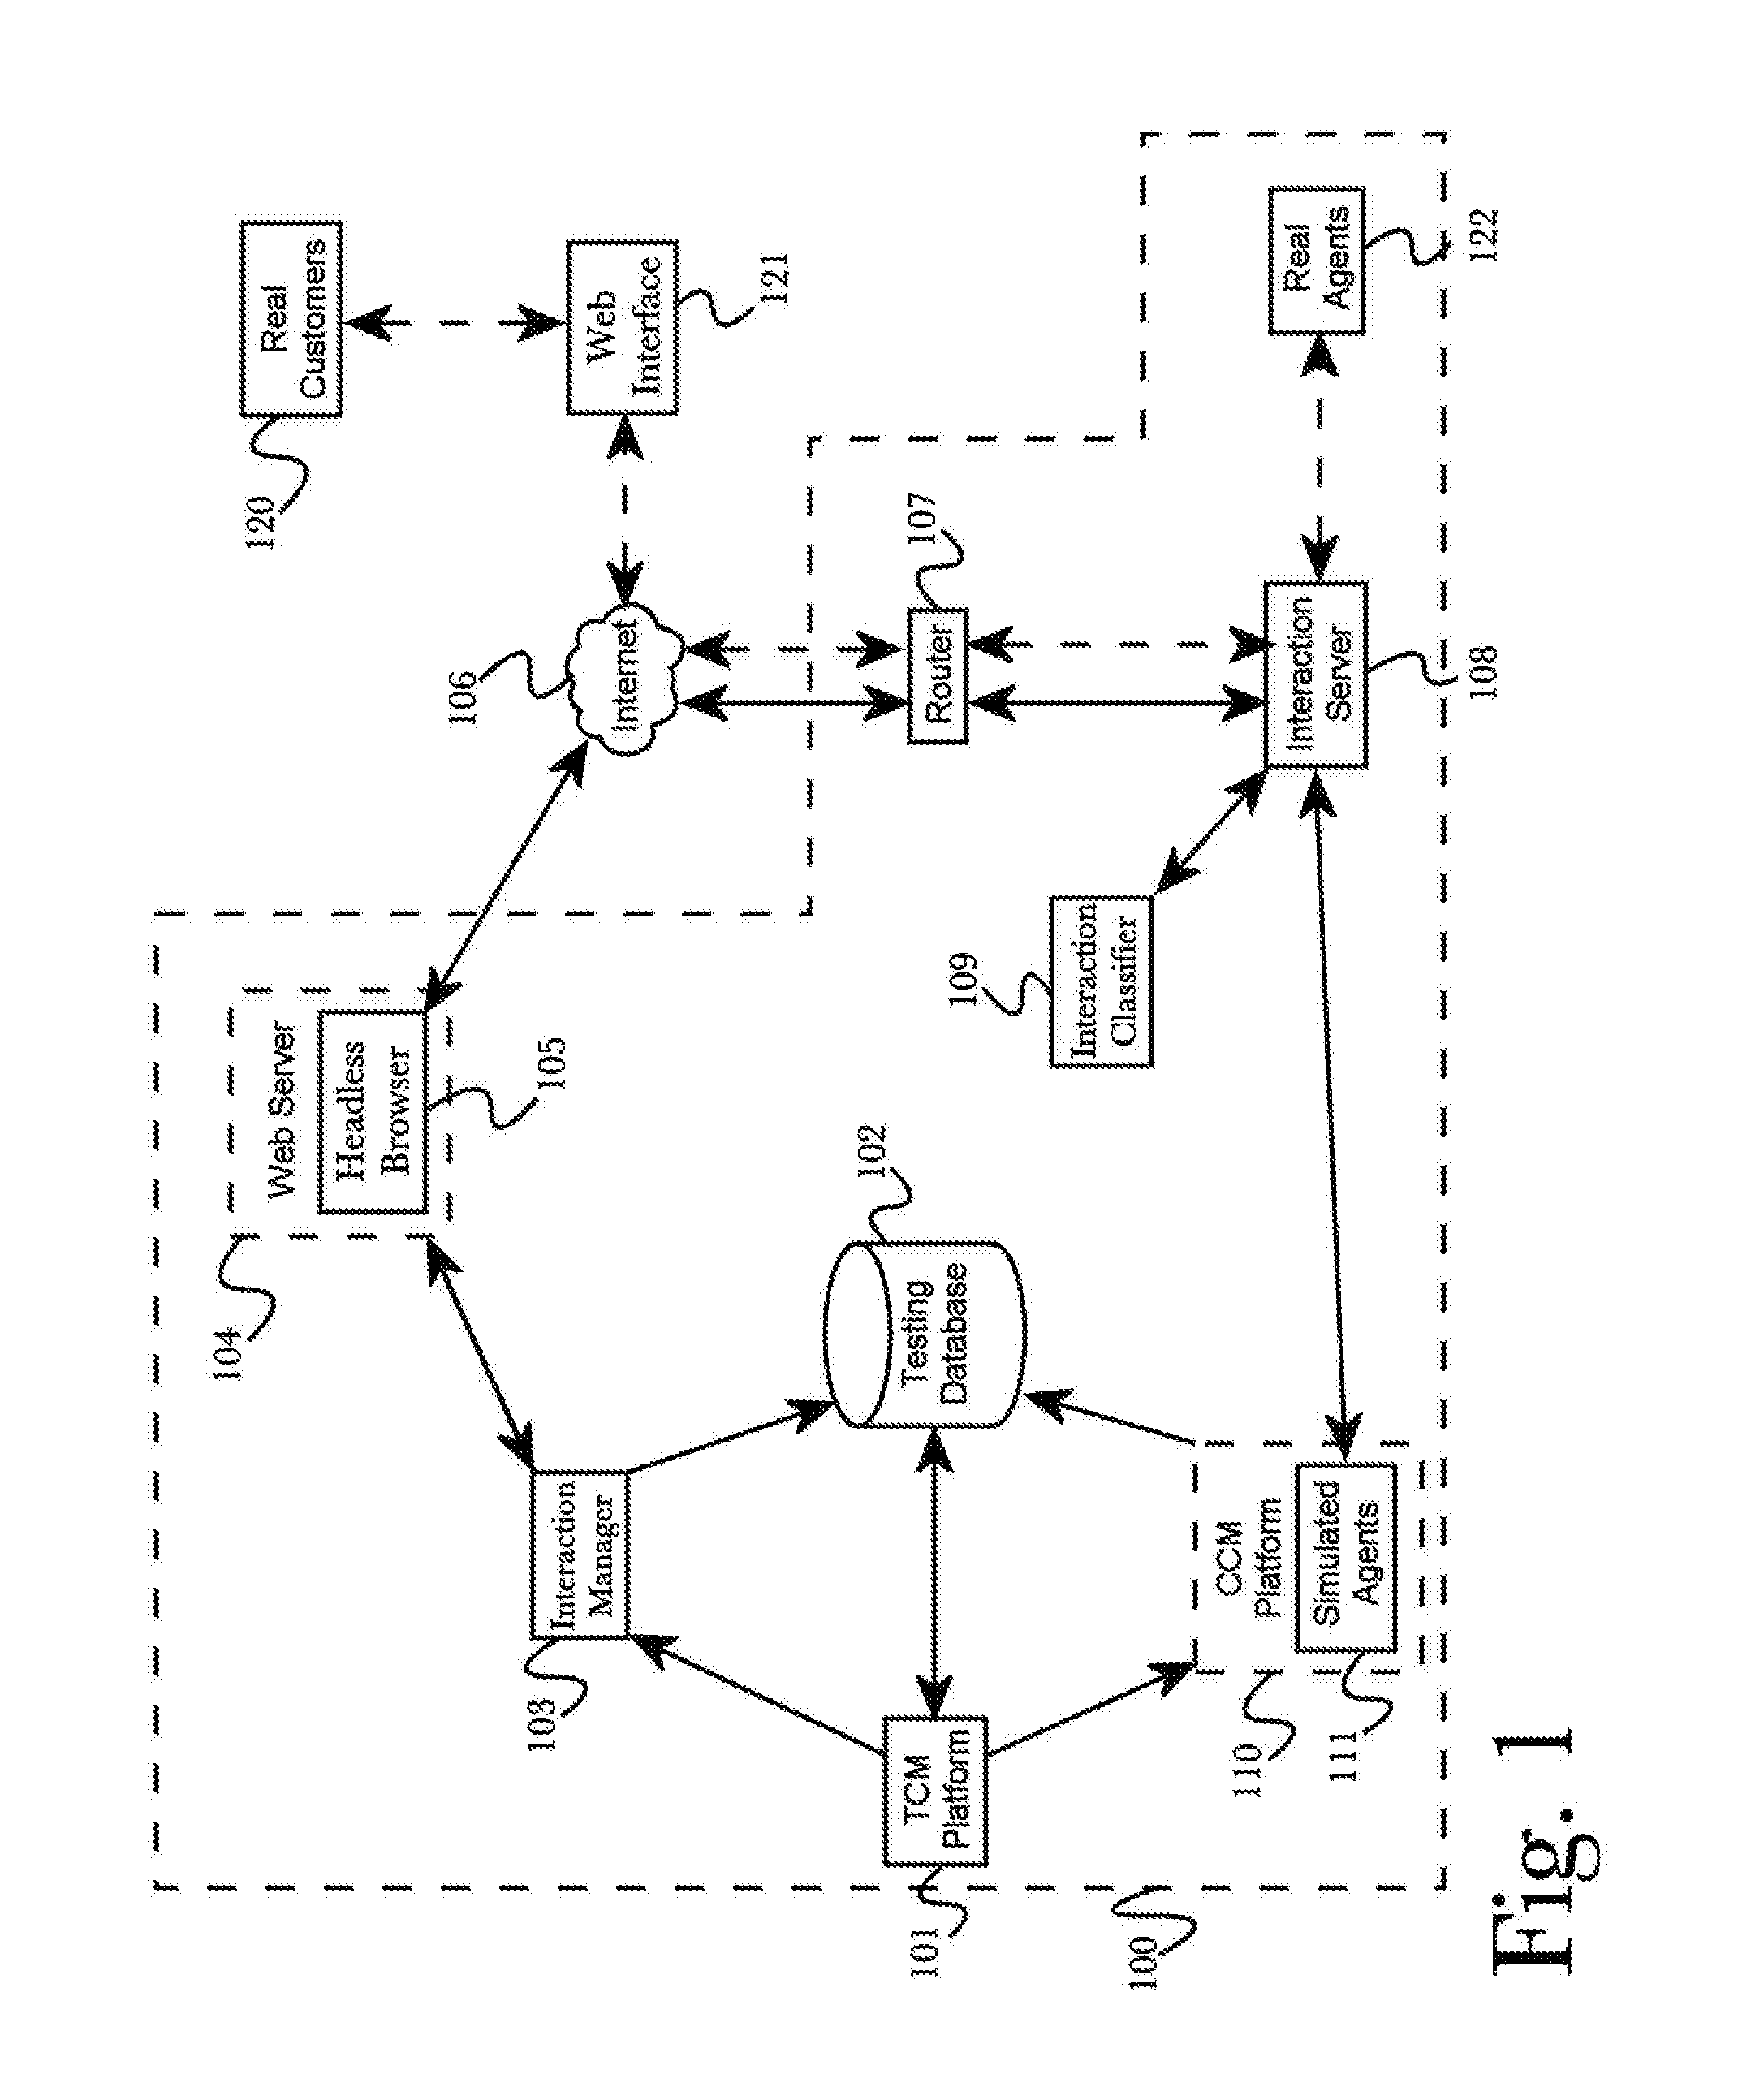 System and method for automated end-to-end web interaction testing